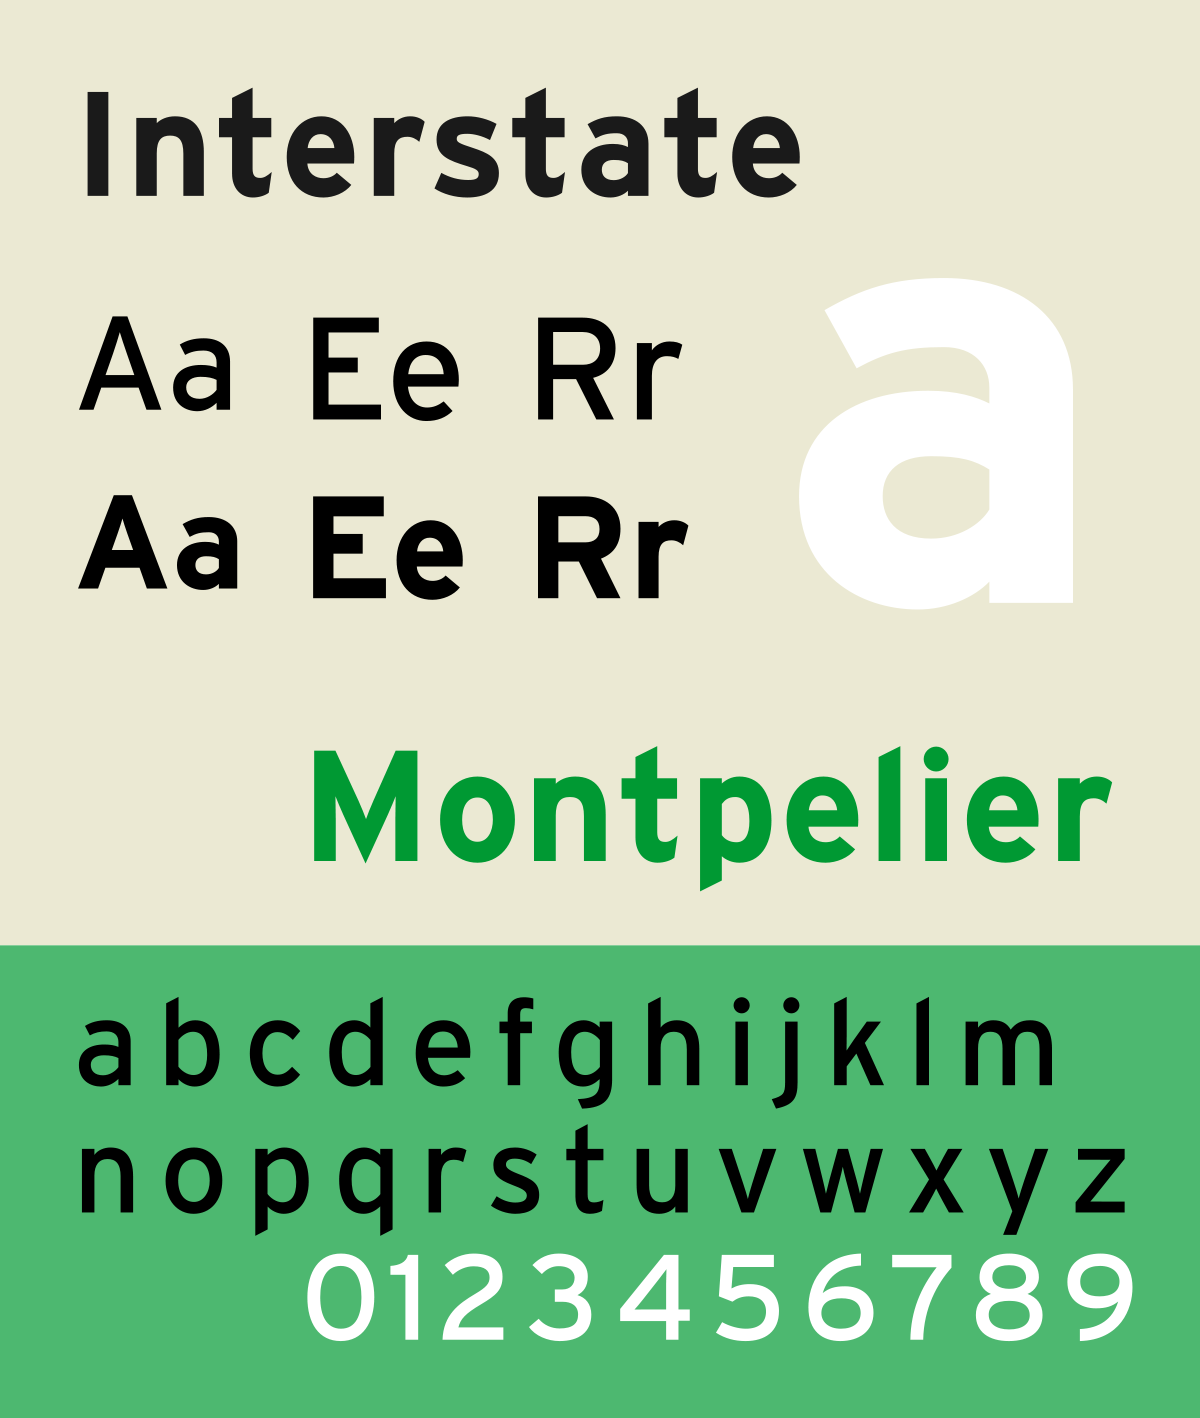 25 most used typefaces in advertising: Interstate